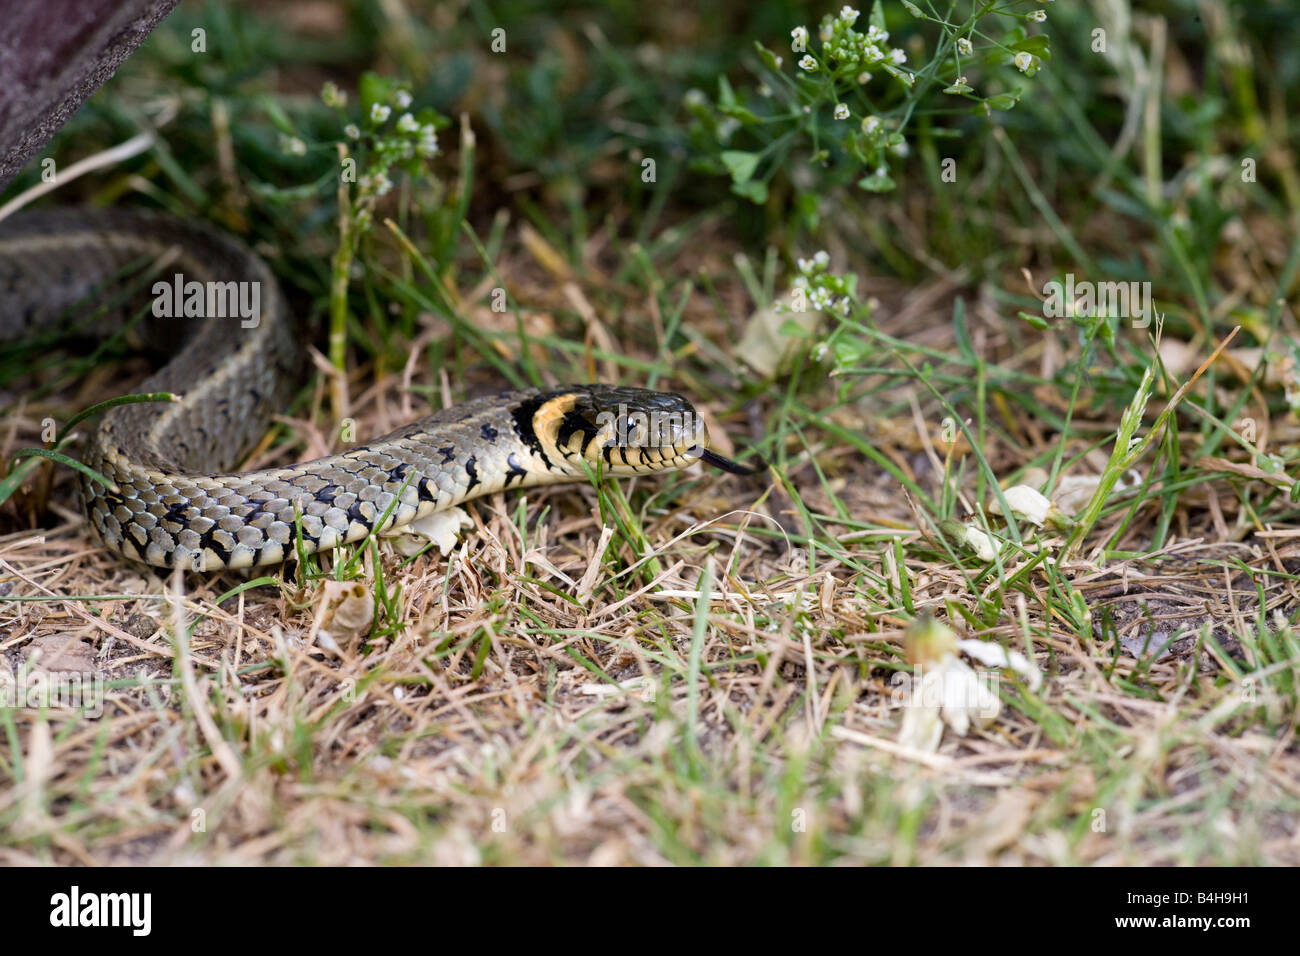 Close-up of Grass Snake (Natrix natrix) in forest Stock Photo